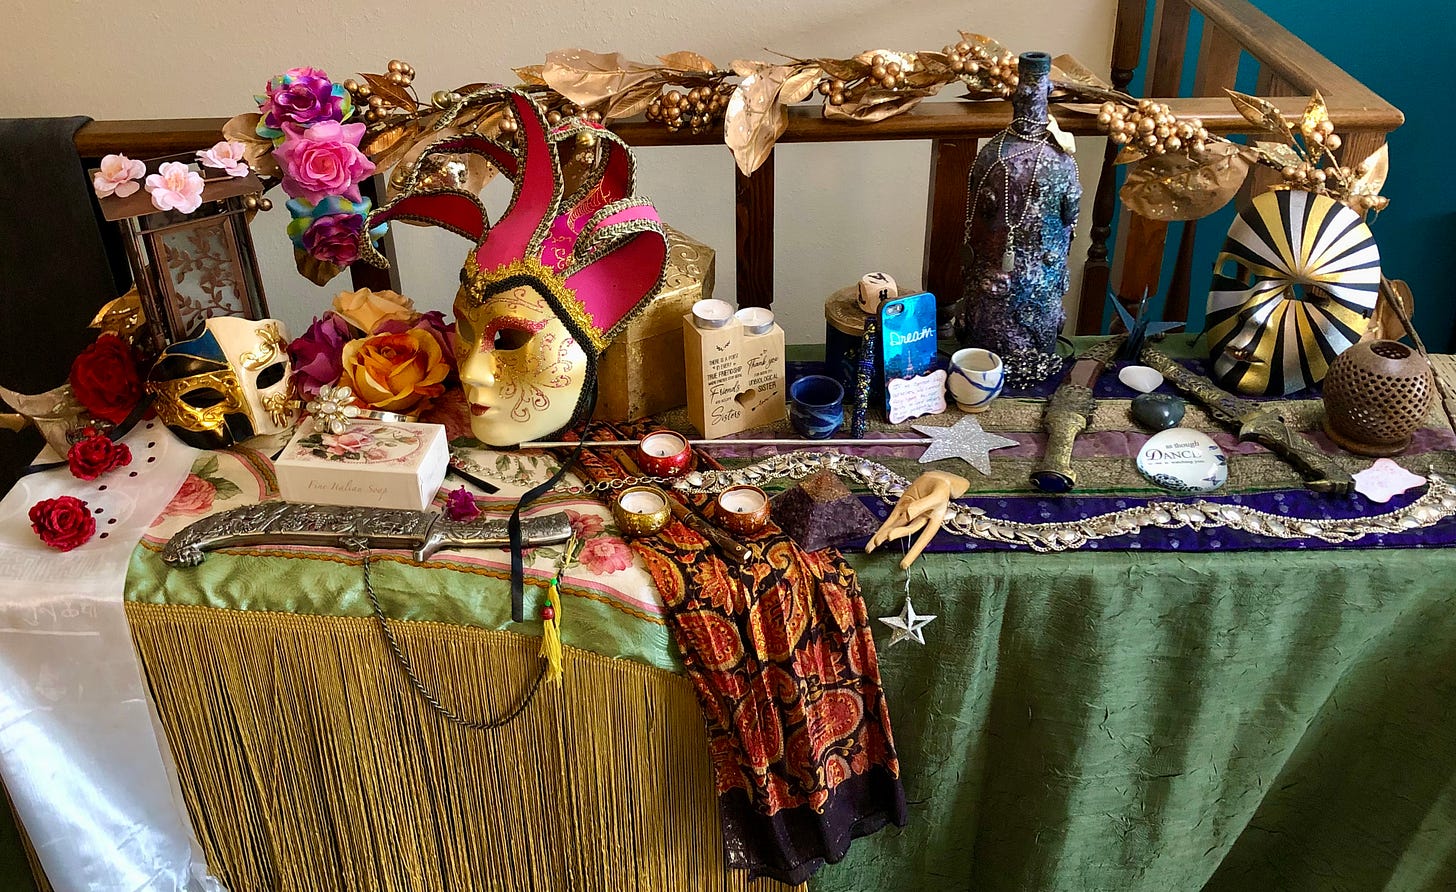 An altar decorated with masks, candles, roses, stars, daggers and twining leaves. On the left, the hues are reds, pinks, golds; on the right are silver, gold, midnight blue and purple.